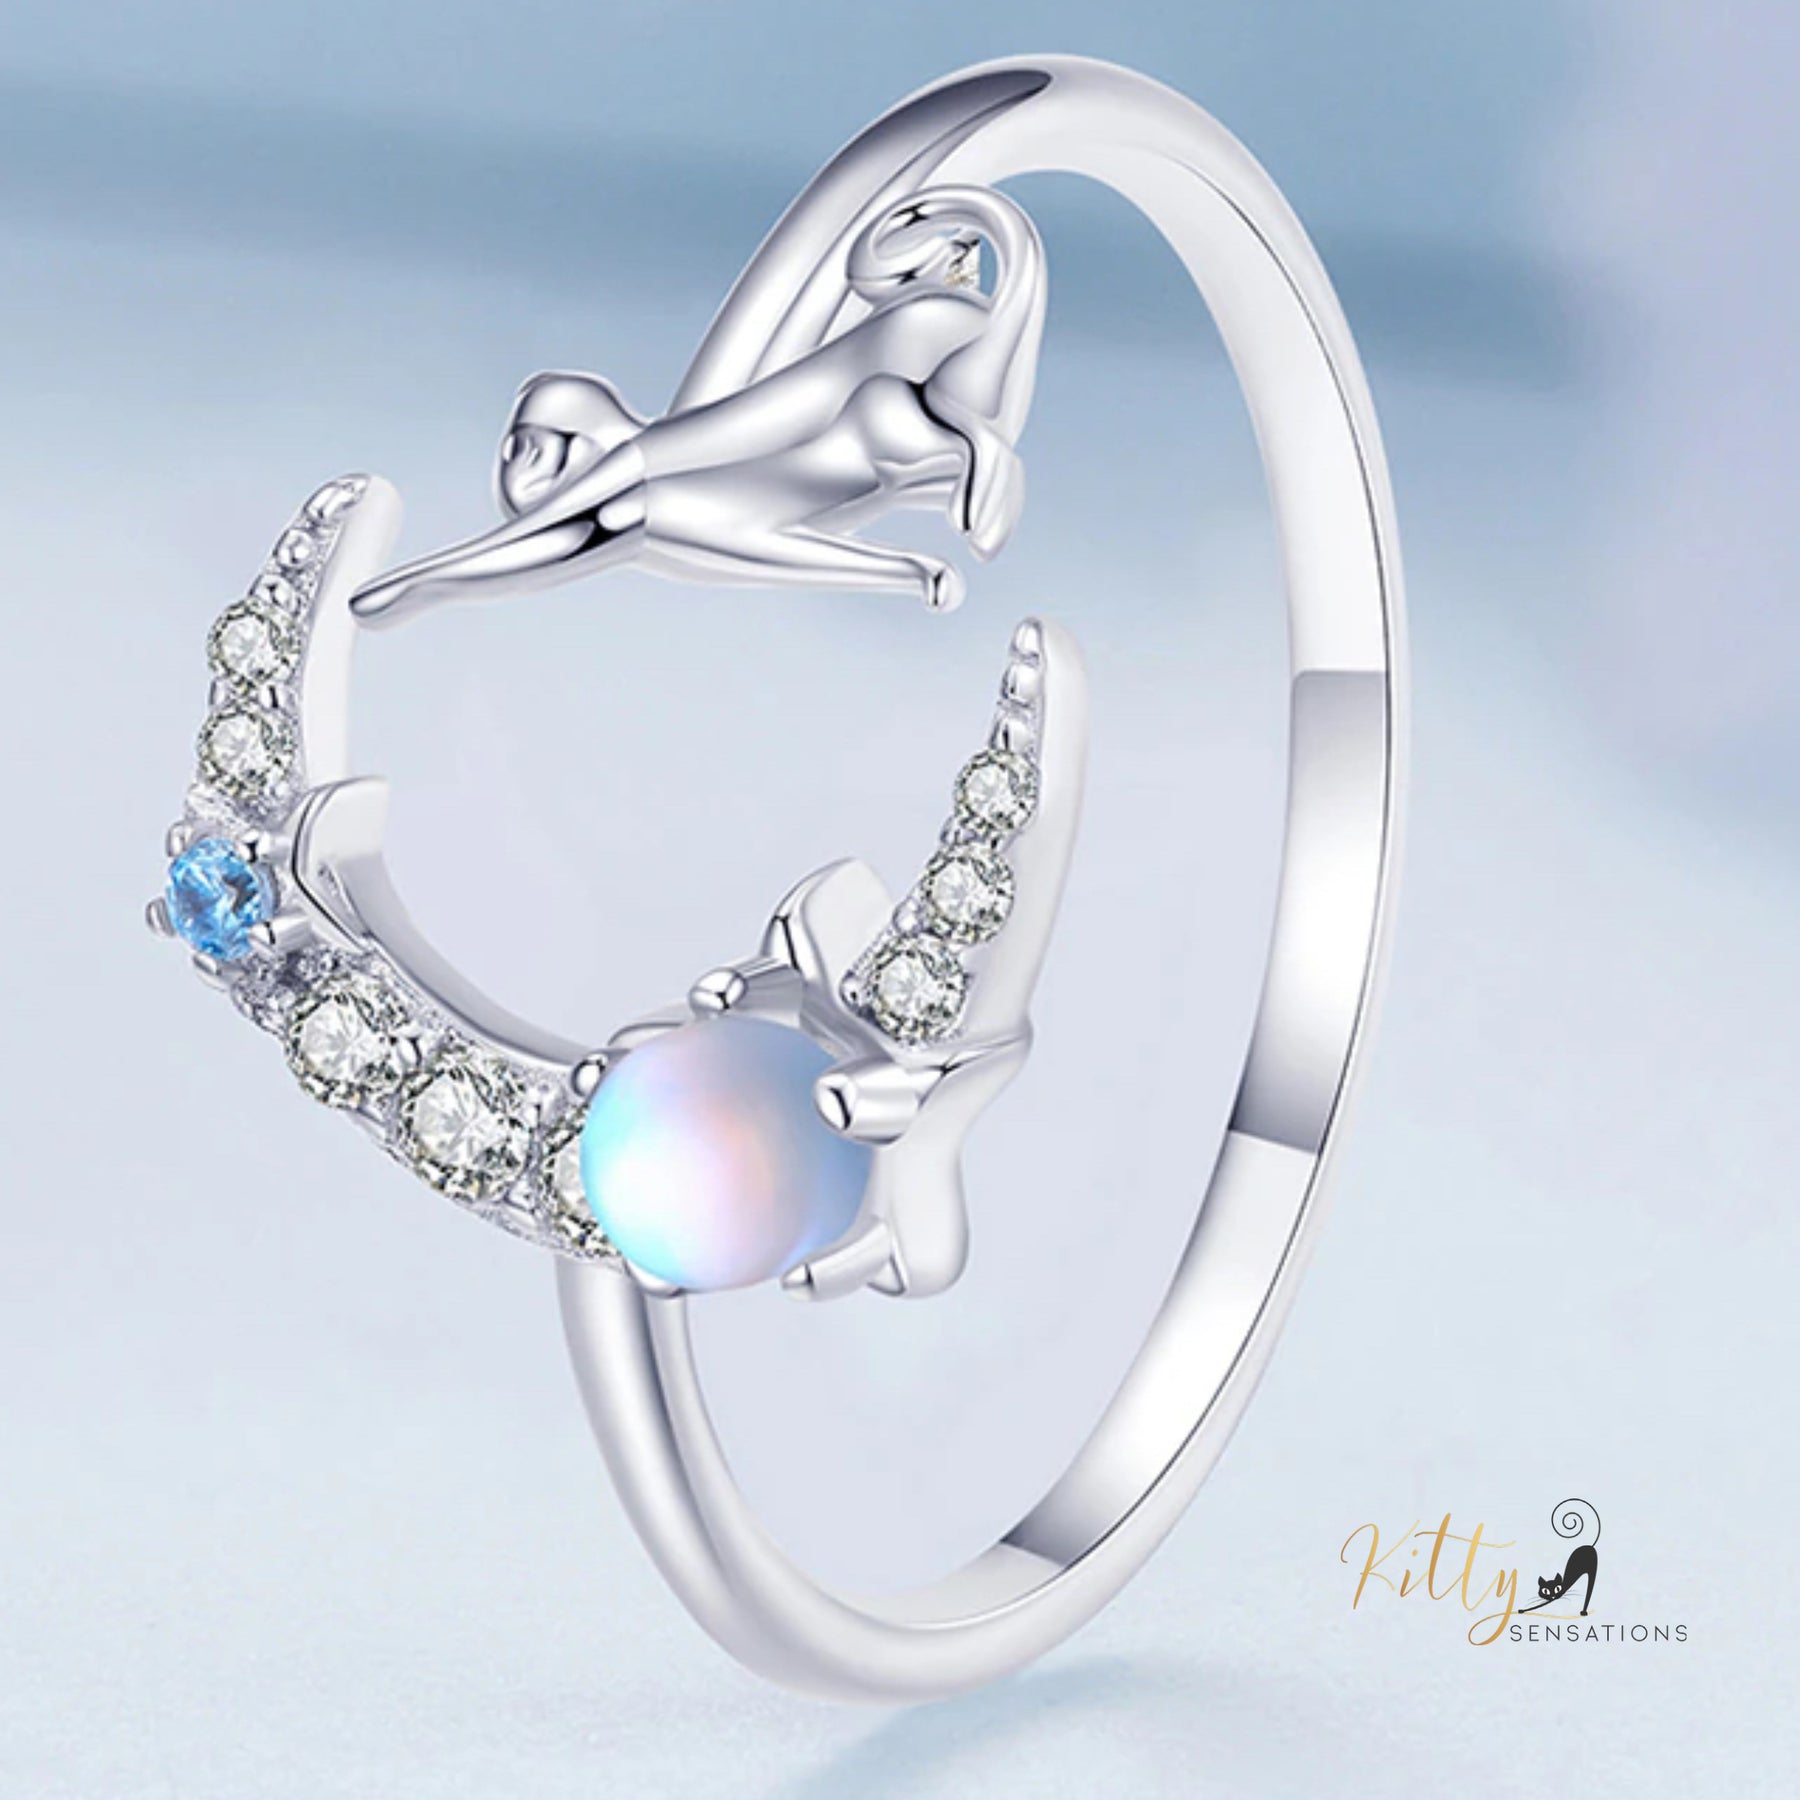 Reaching-for-The-Stars Moonstone Cat Ring in Solid 925 Sterling Silver - Platinum Plated - Adjustable Size